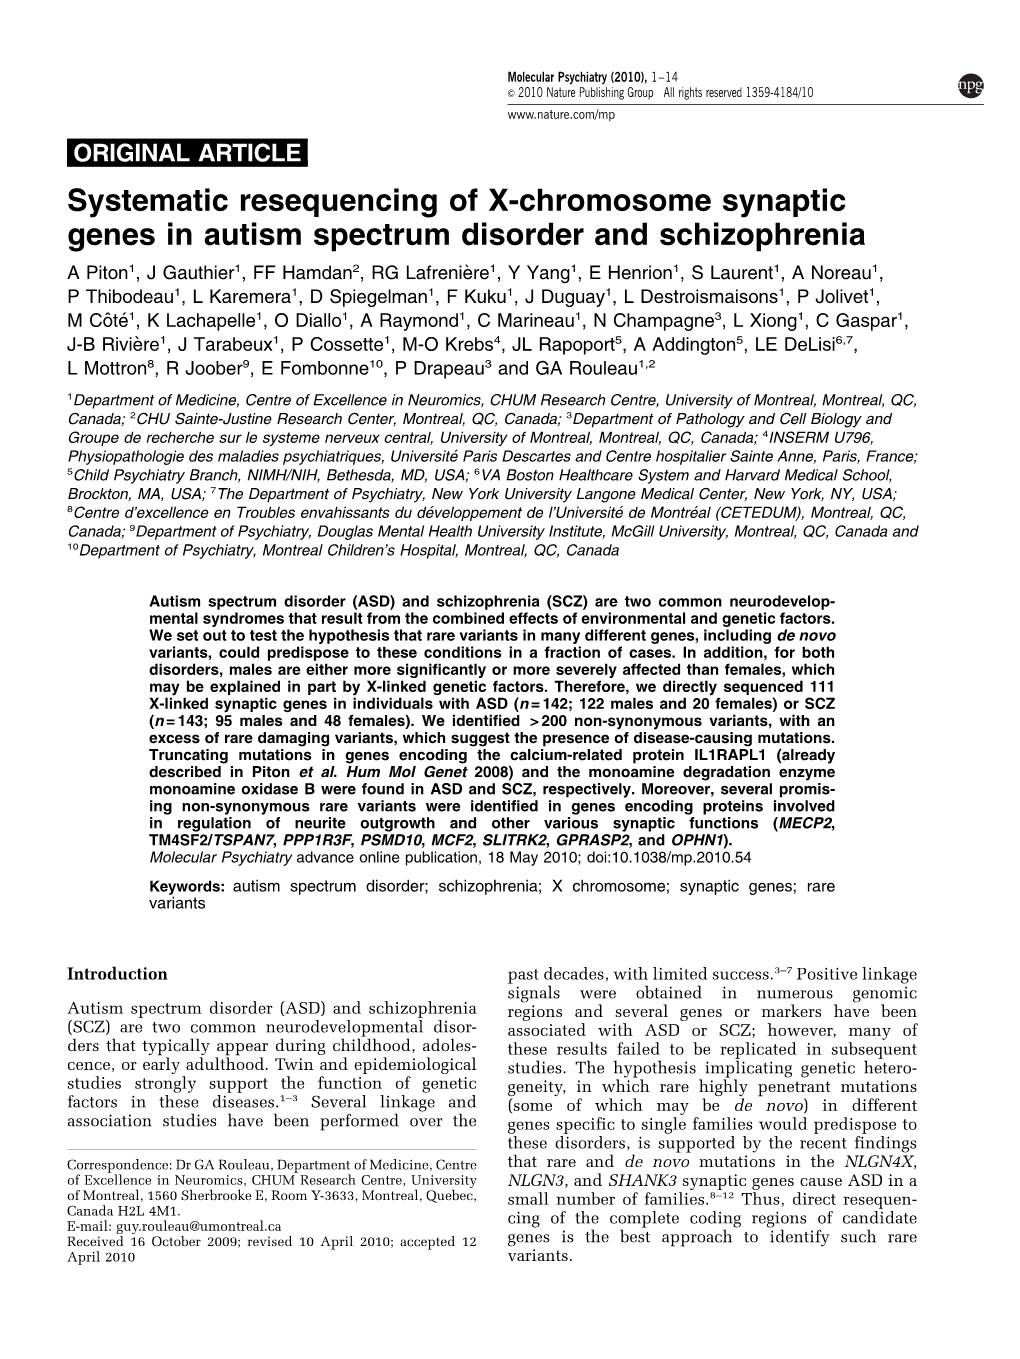 Systematic Resequencing of X-Chromosome Synaptic Genes In